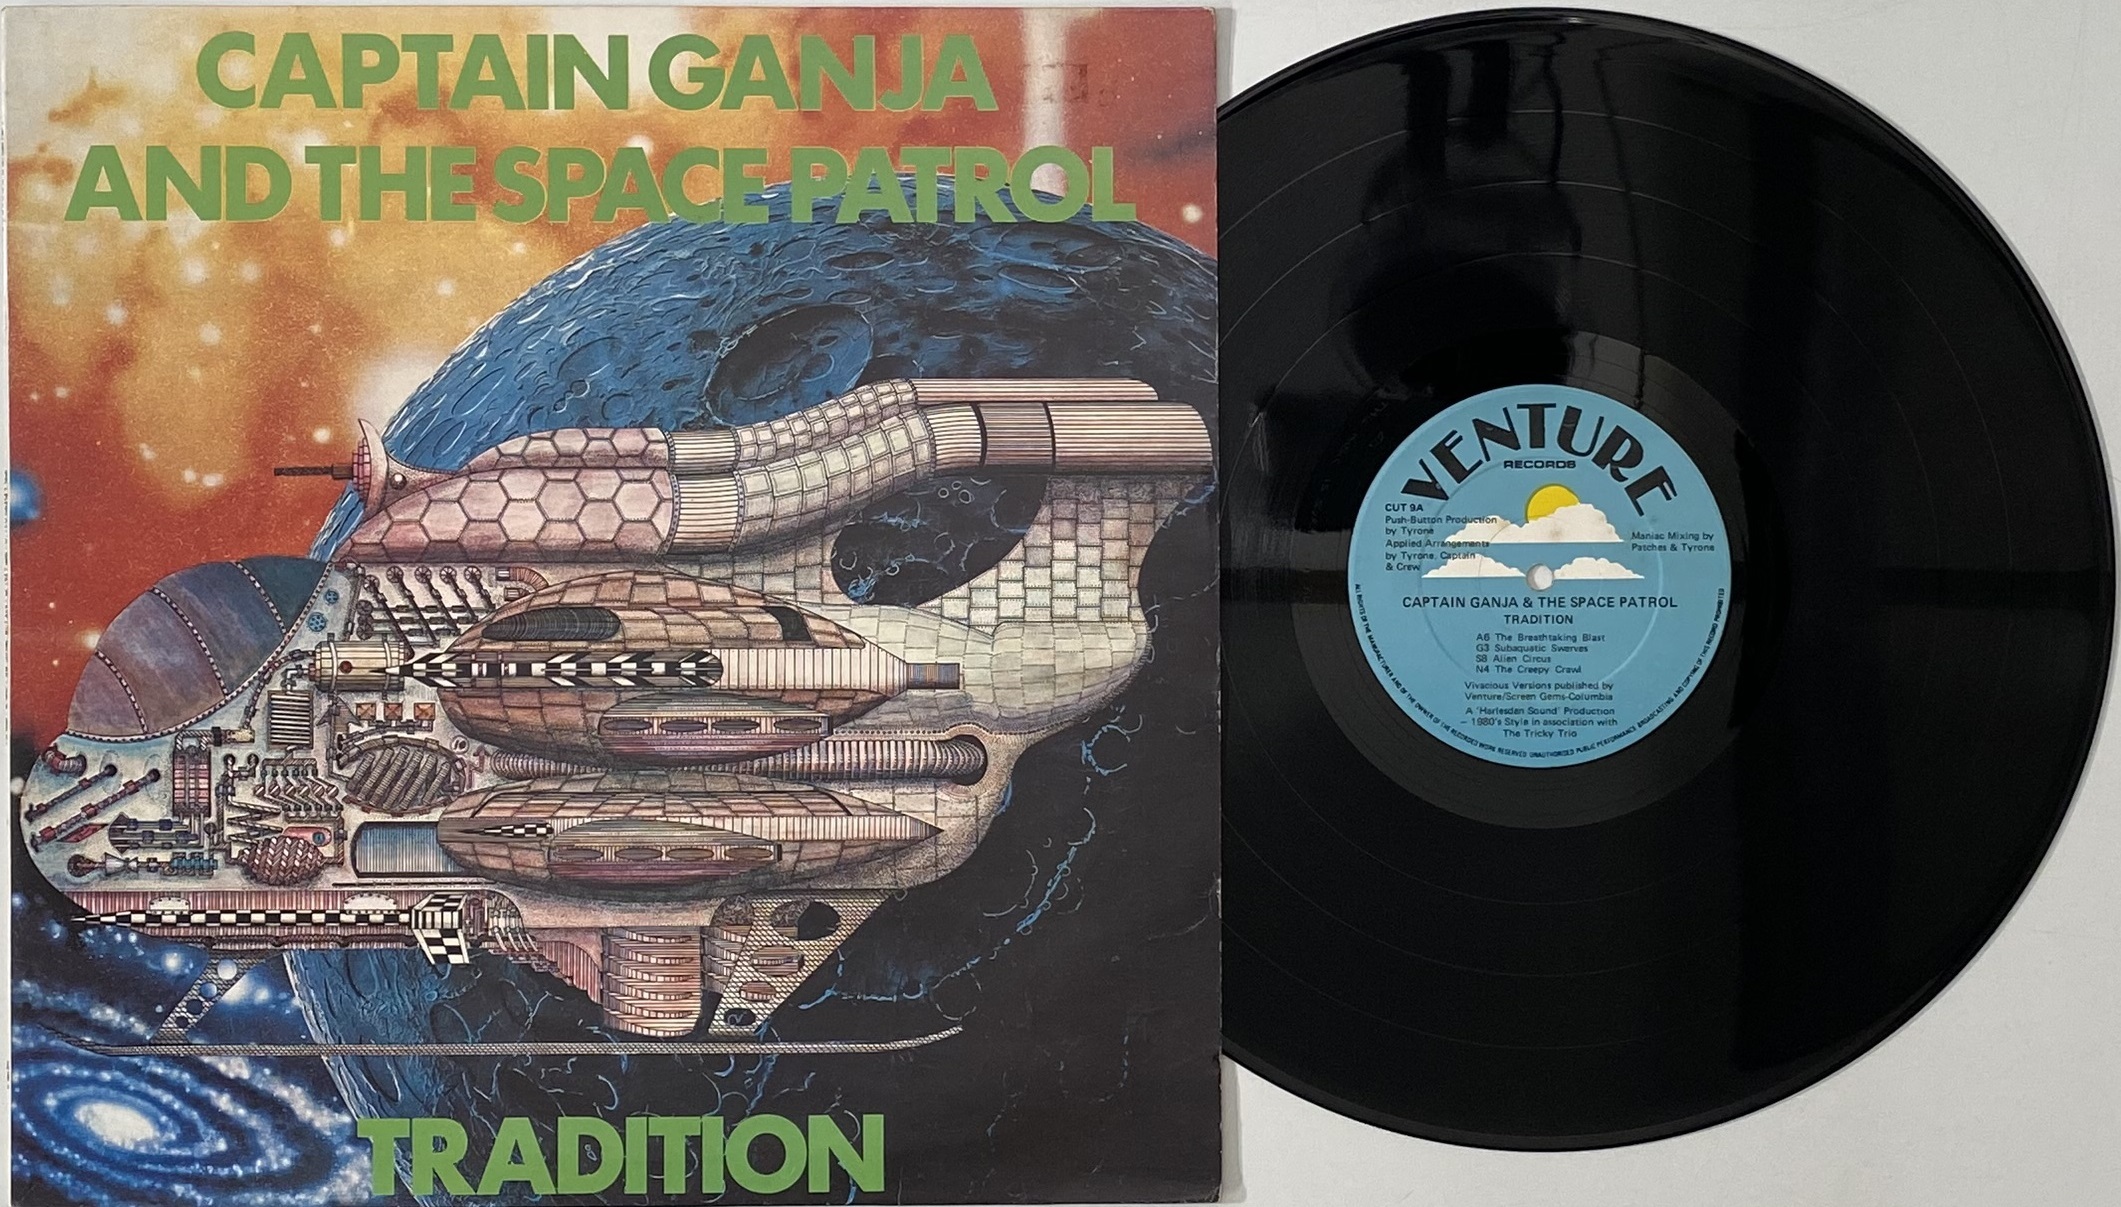 Lot 3 - TRADITION - CAPTAIN GANJA AND THE SPACE PATROL